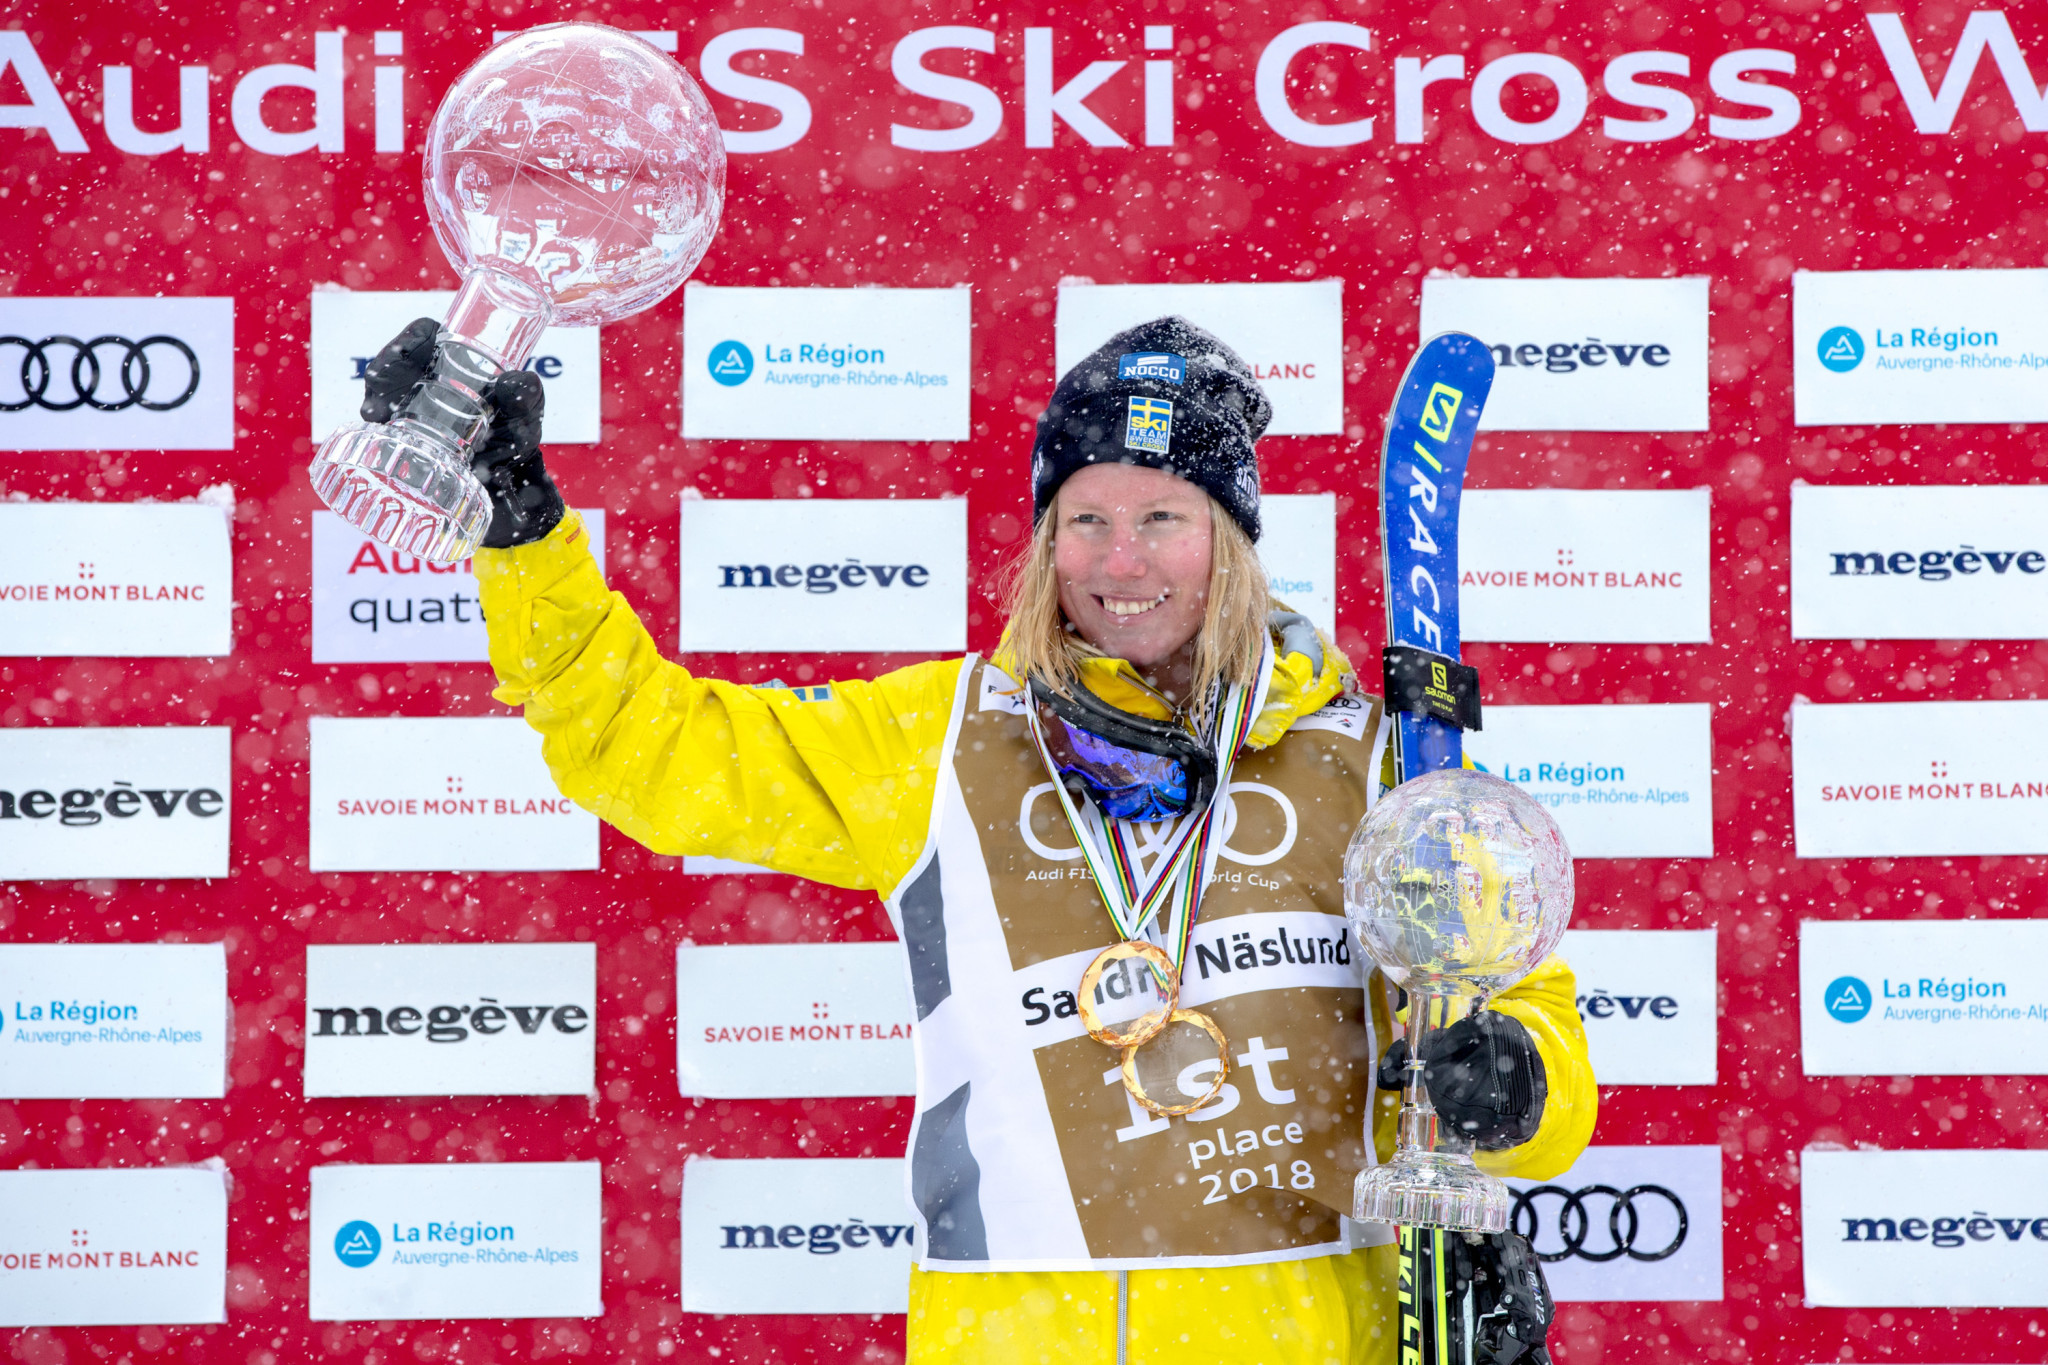 FIS Ski Cross World Cup set to continue in Idre Fjall with home favourite Naeslund out to maintain impressive form